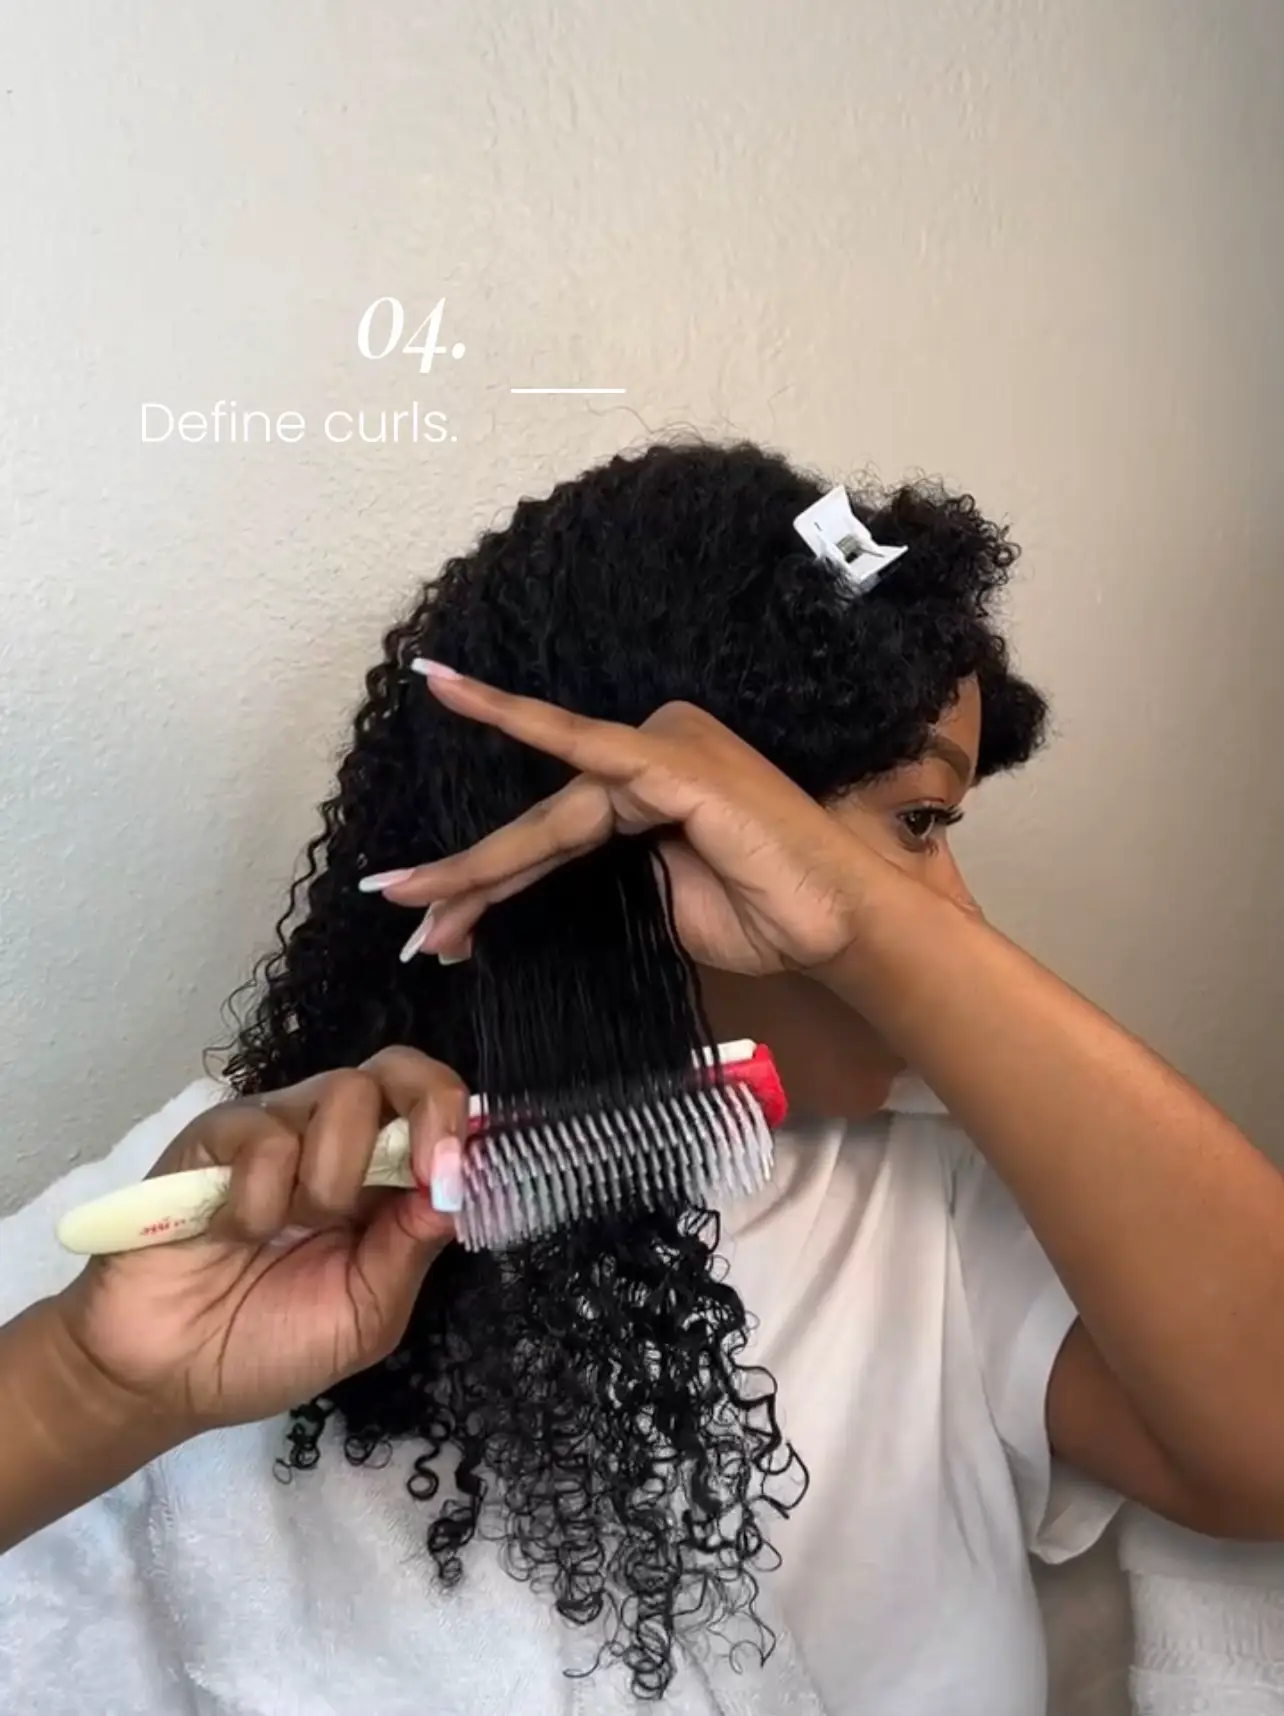 beginner friendly wig install tutorial🥰, Video published by nadulahair